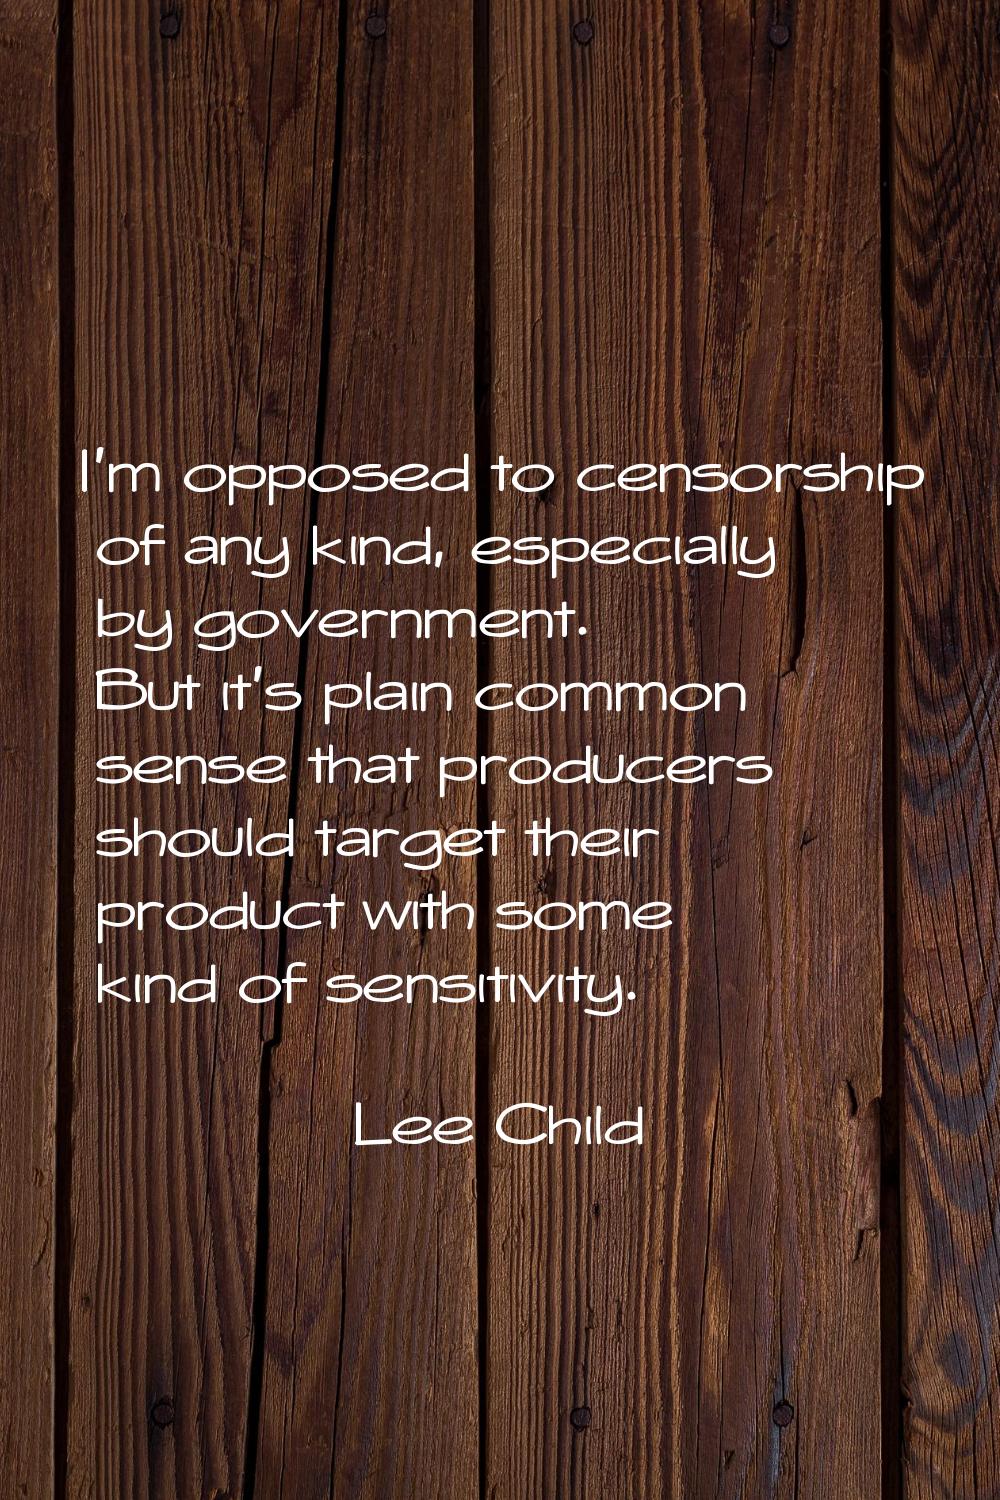 I'm opposed to censorship of any kind, especially by government. But it's plain common sense that p